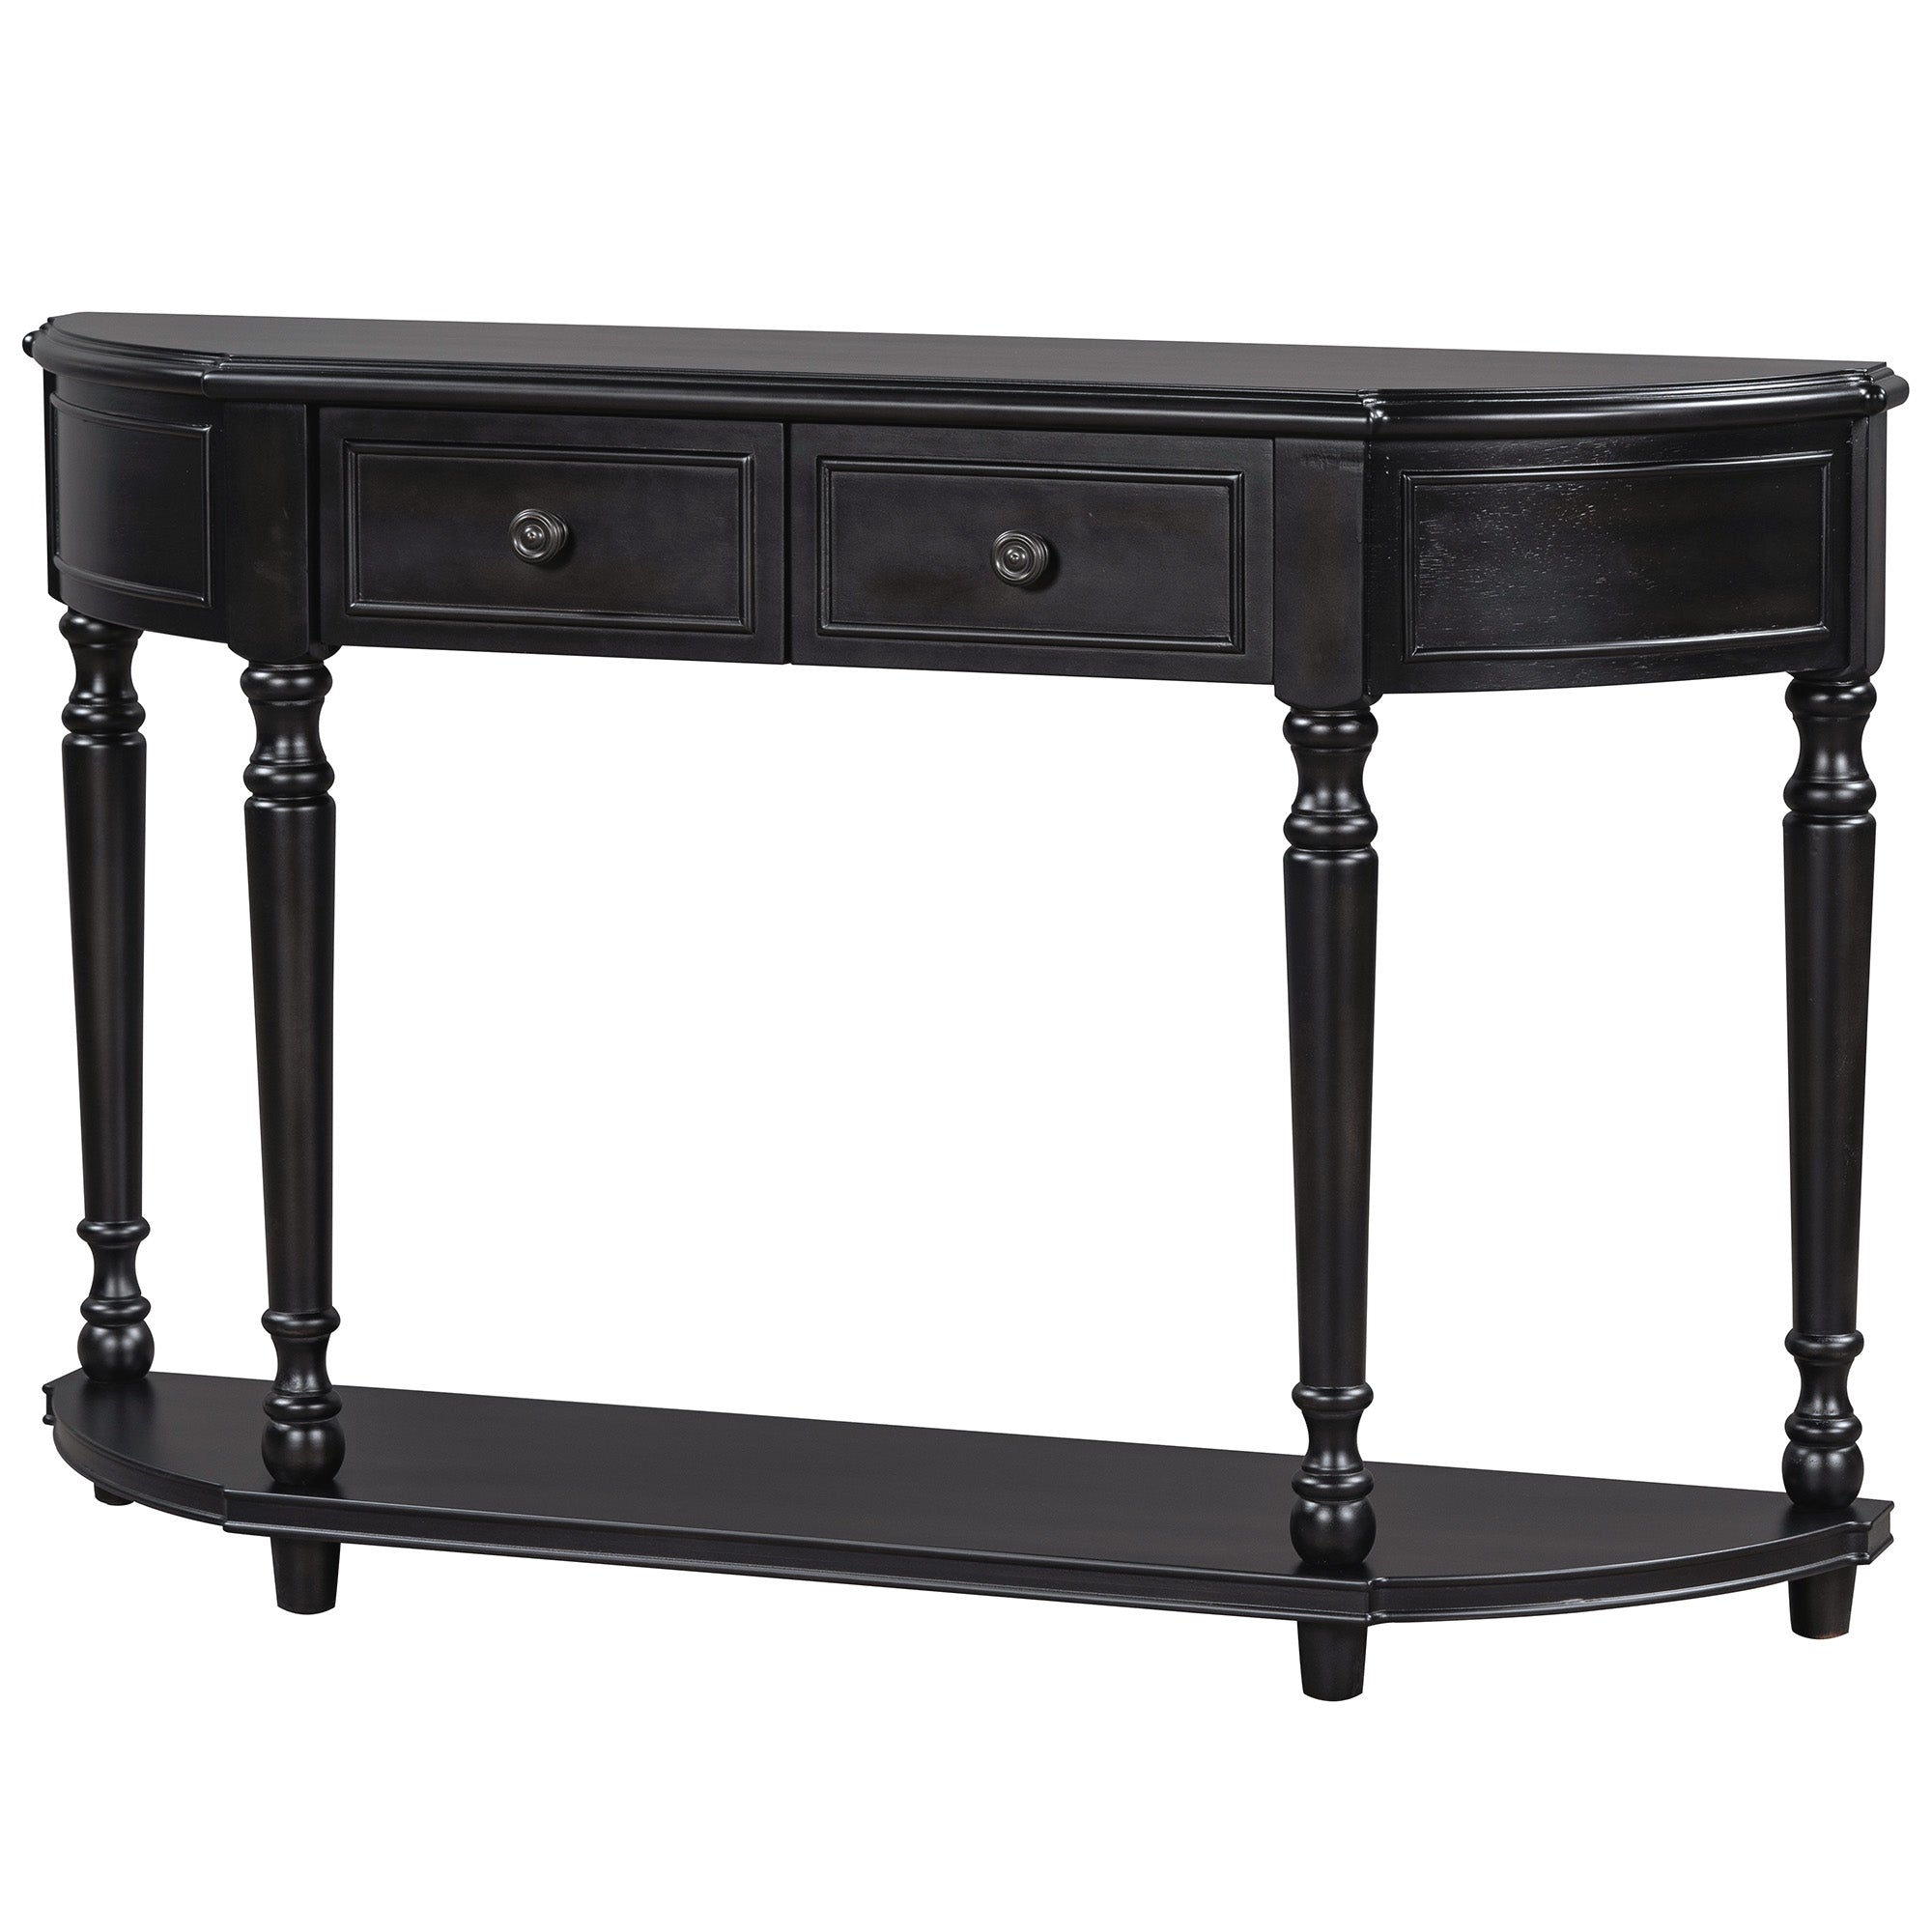 Sanctuary Console Table with Open Style Shelf, Solid Wooden Frame and 2 Top Drawers - Consoles